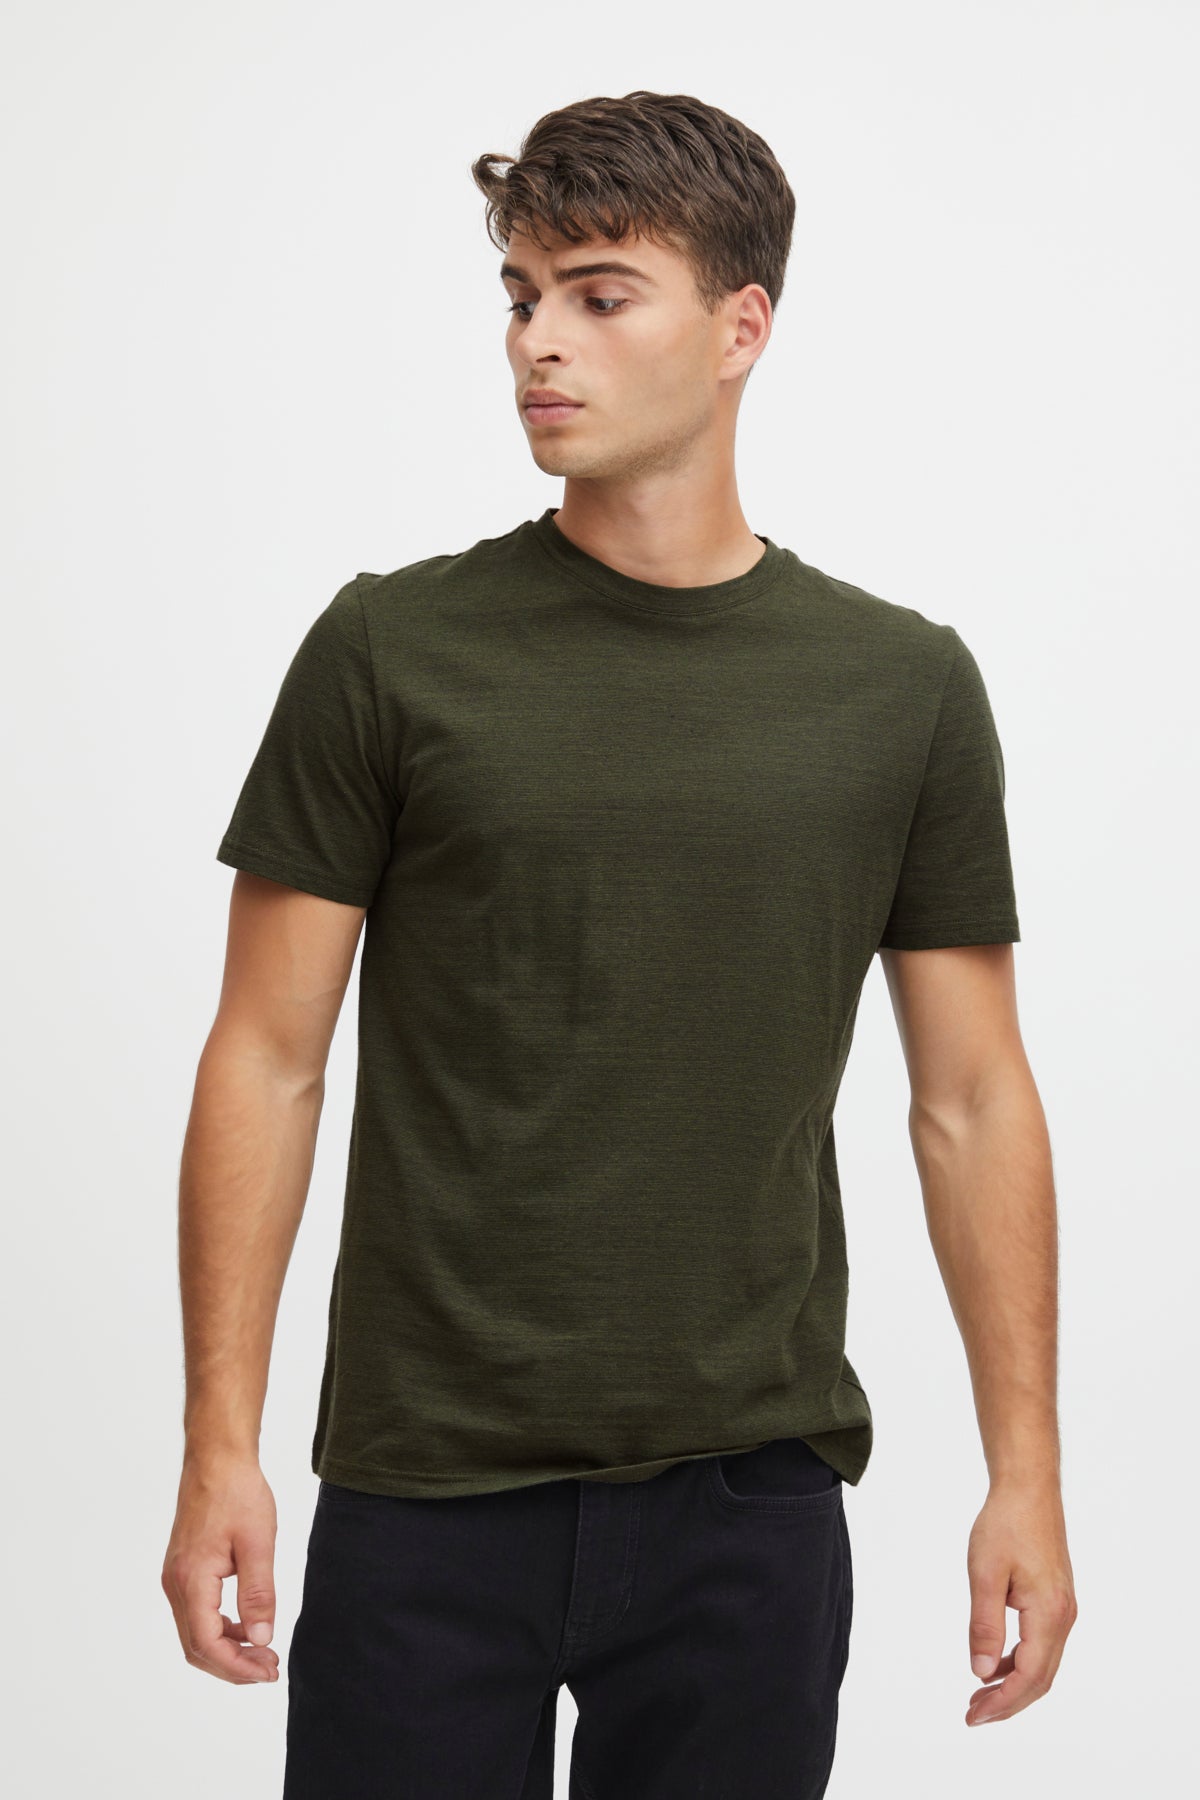 Thor Micro Striped Tee - Cypress - The Sons online